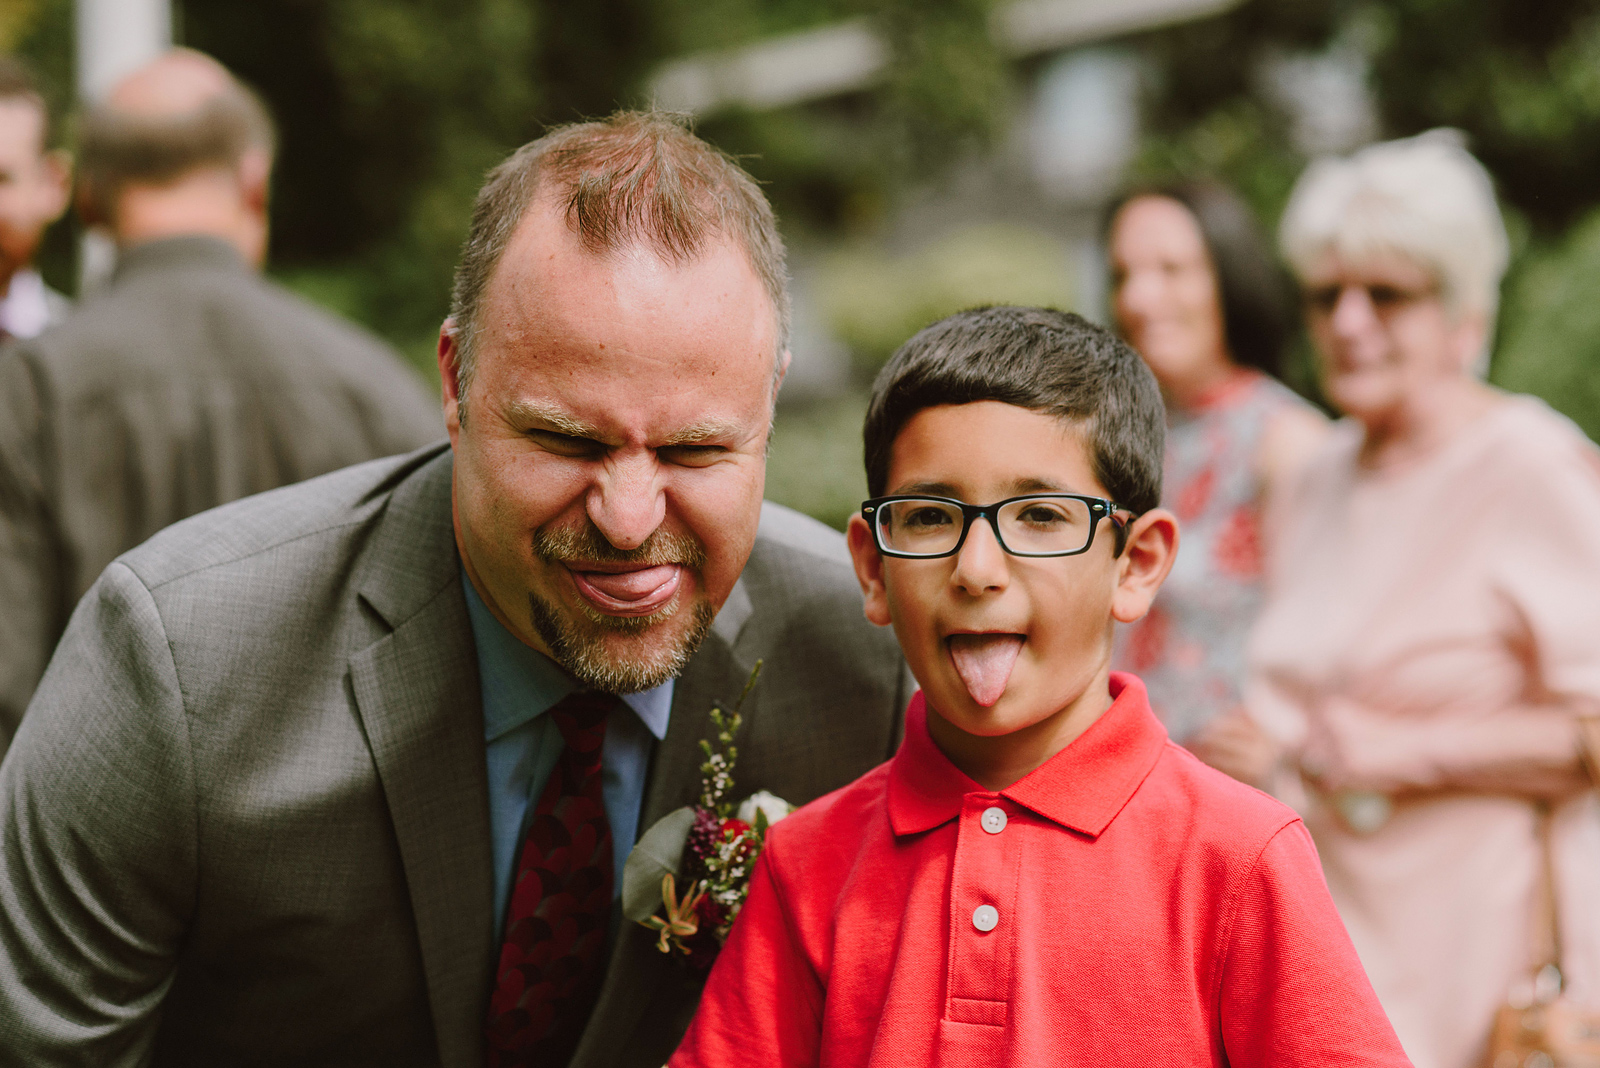 Wedding guest and young child sticking their tongues out at the camera - Oaks Pioneer Church Wedding